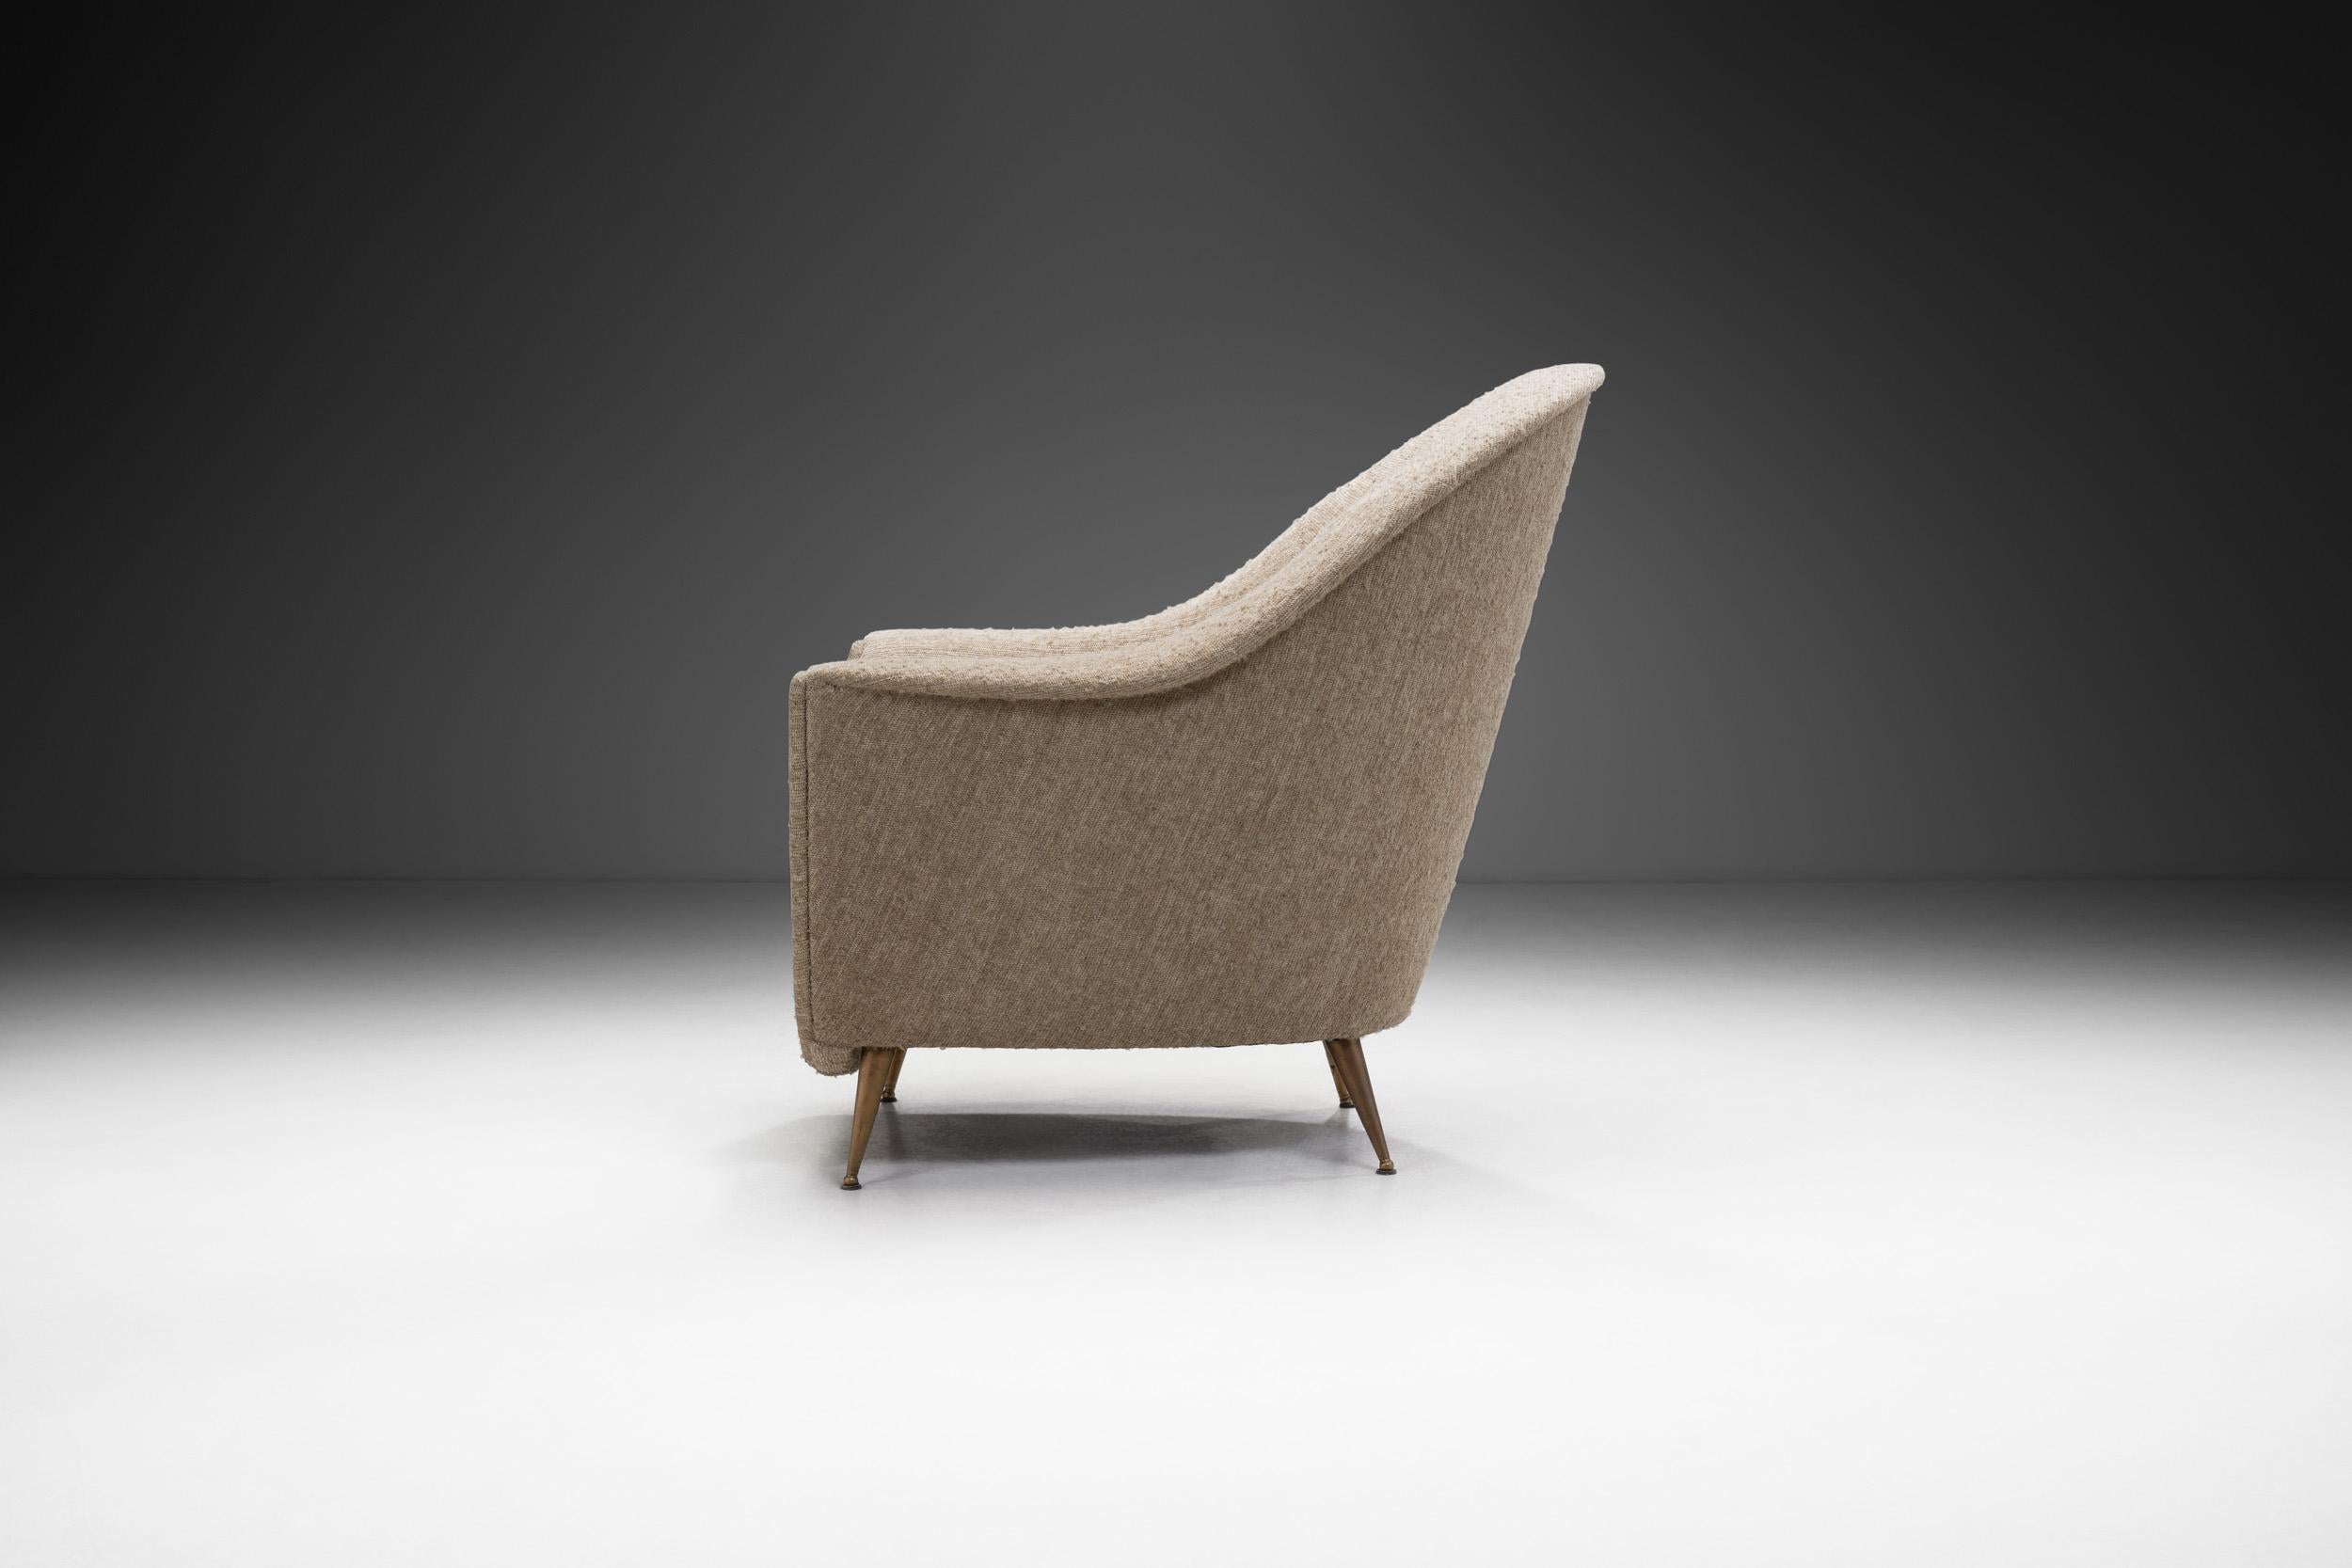 Italian Mid-Century Modern Lounge Chair by Ico Parisi (Attr.), Italy 1950s For Sale